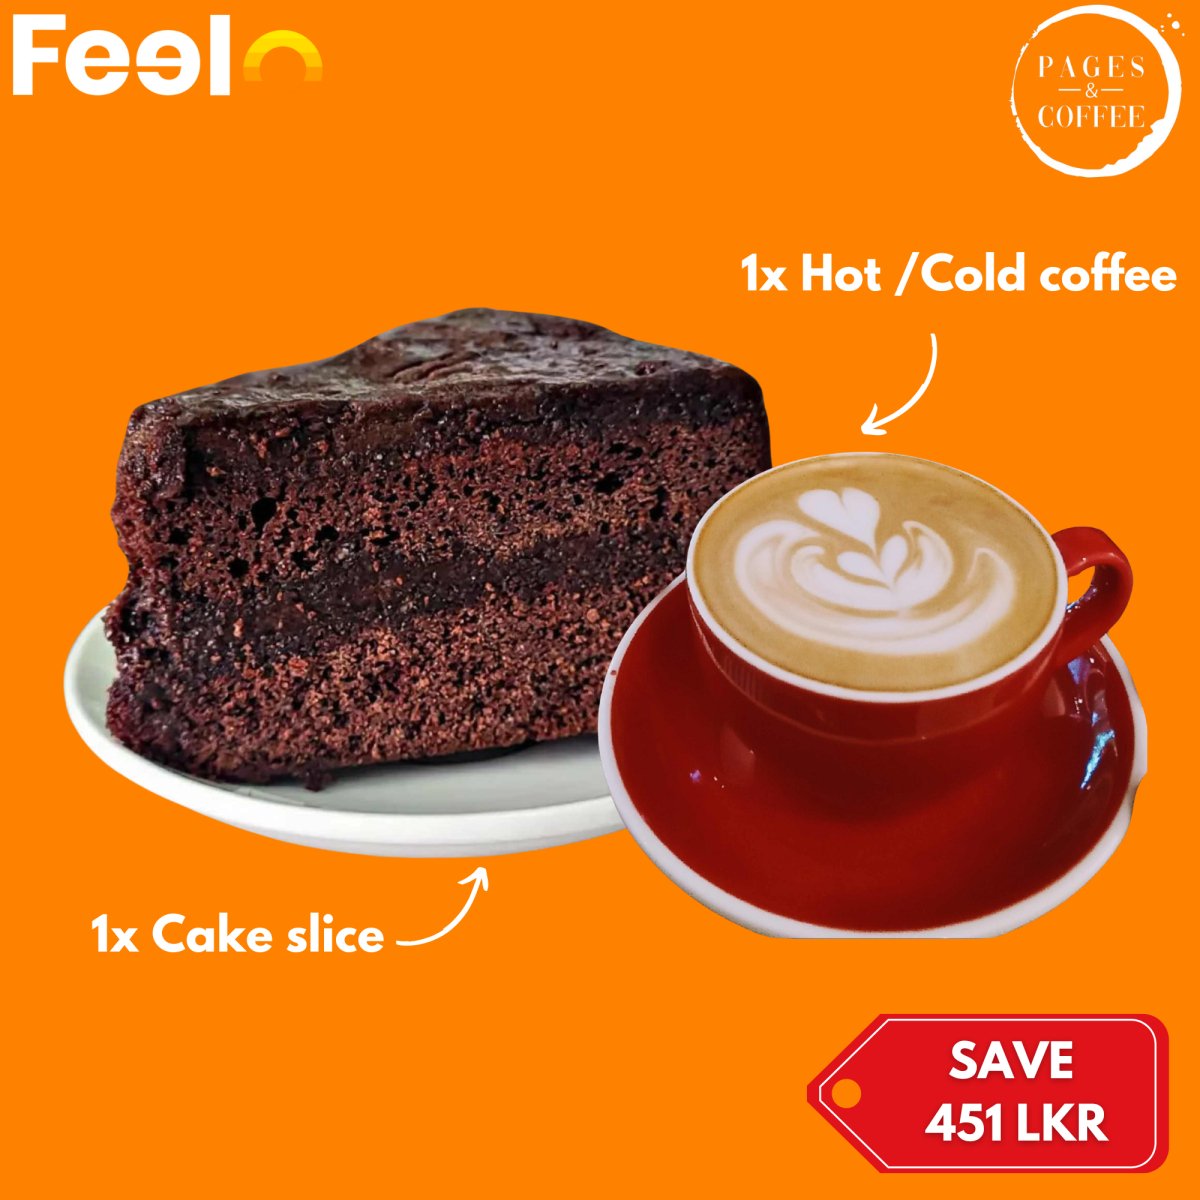 1x Delicious Cake Slice + 1x Freshly Brewed Hot or Cold Coffee of your choice - Pages & Coffee, Colombo - 06 | Feelo